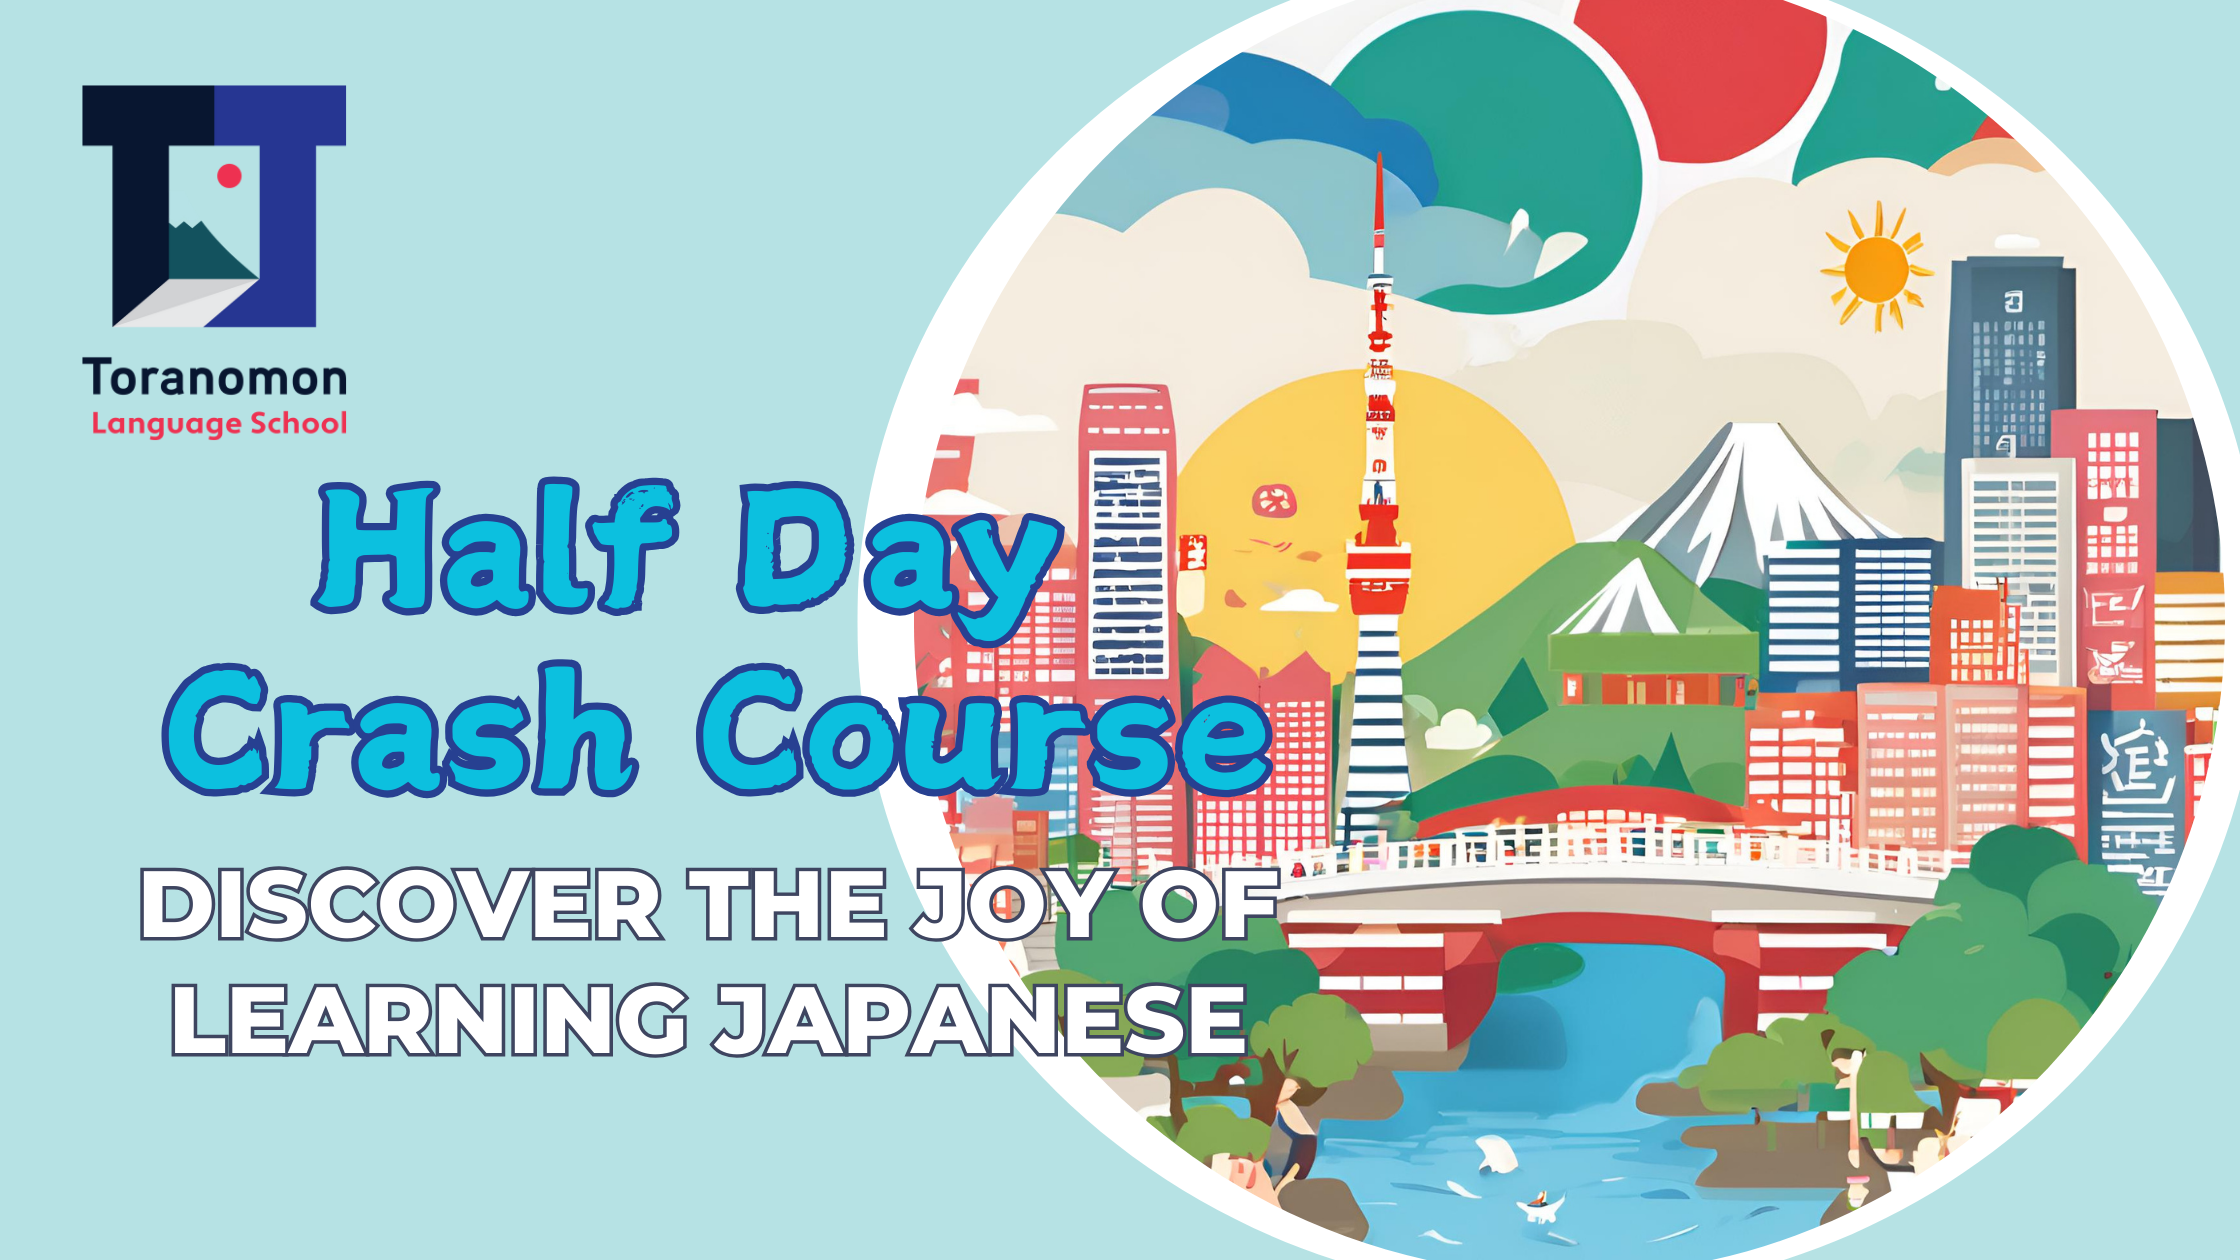 Discover the Joy of Learning Japanese with Crash Course